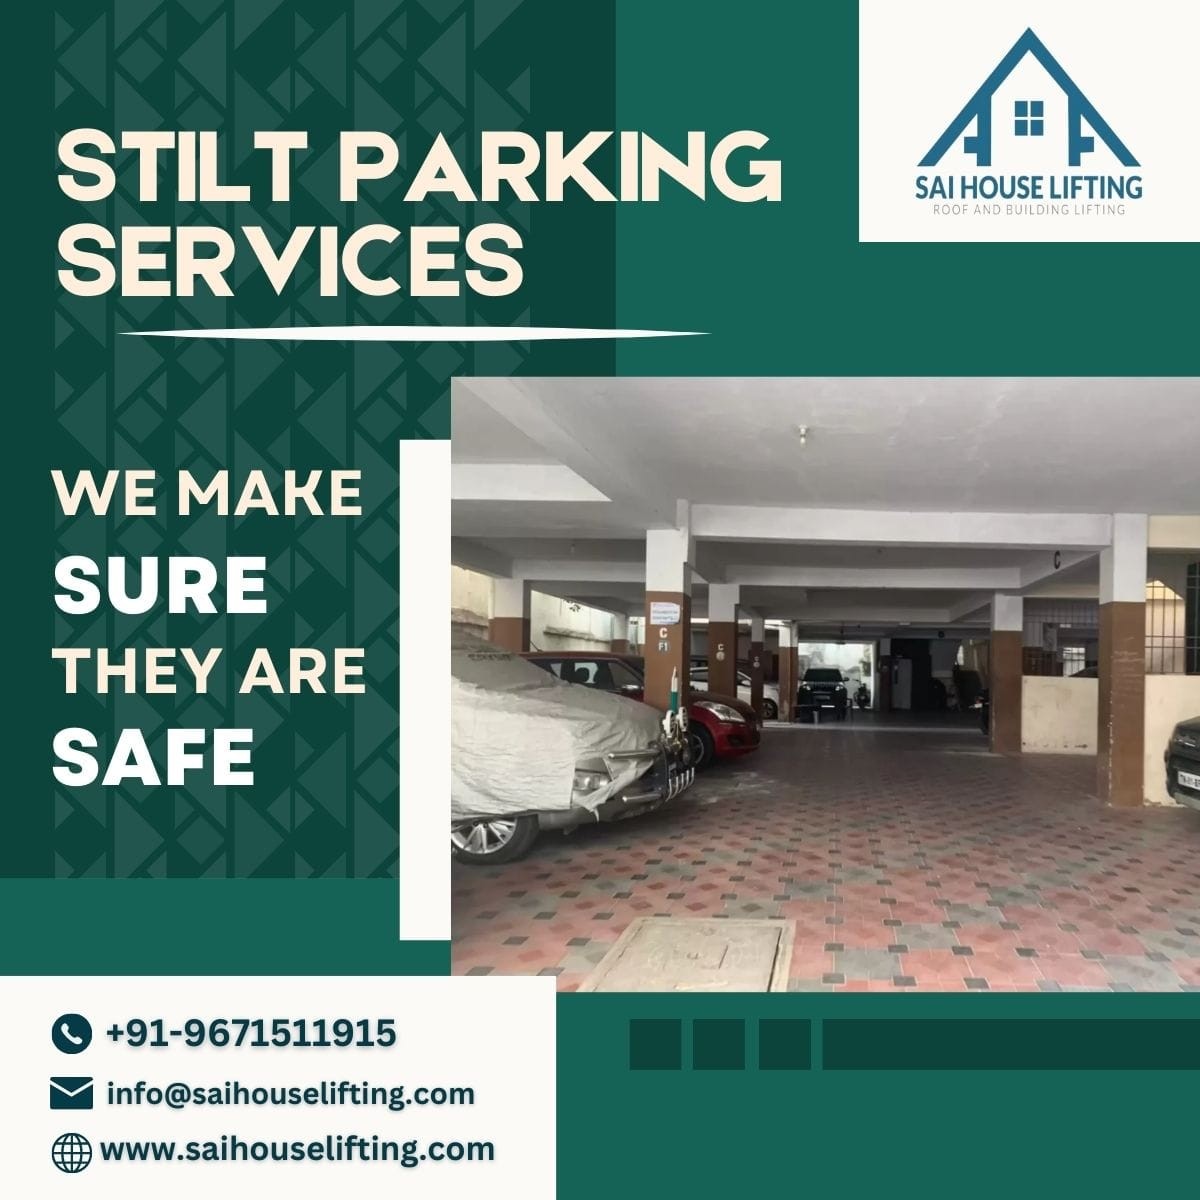 Make Sure About Your Safety With Stilt Parking In Hyderabad